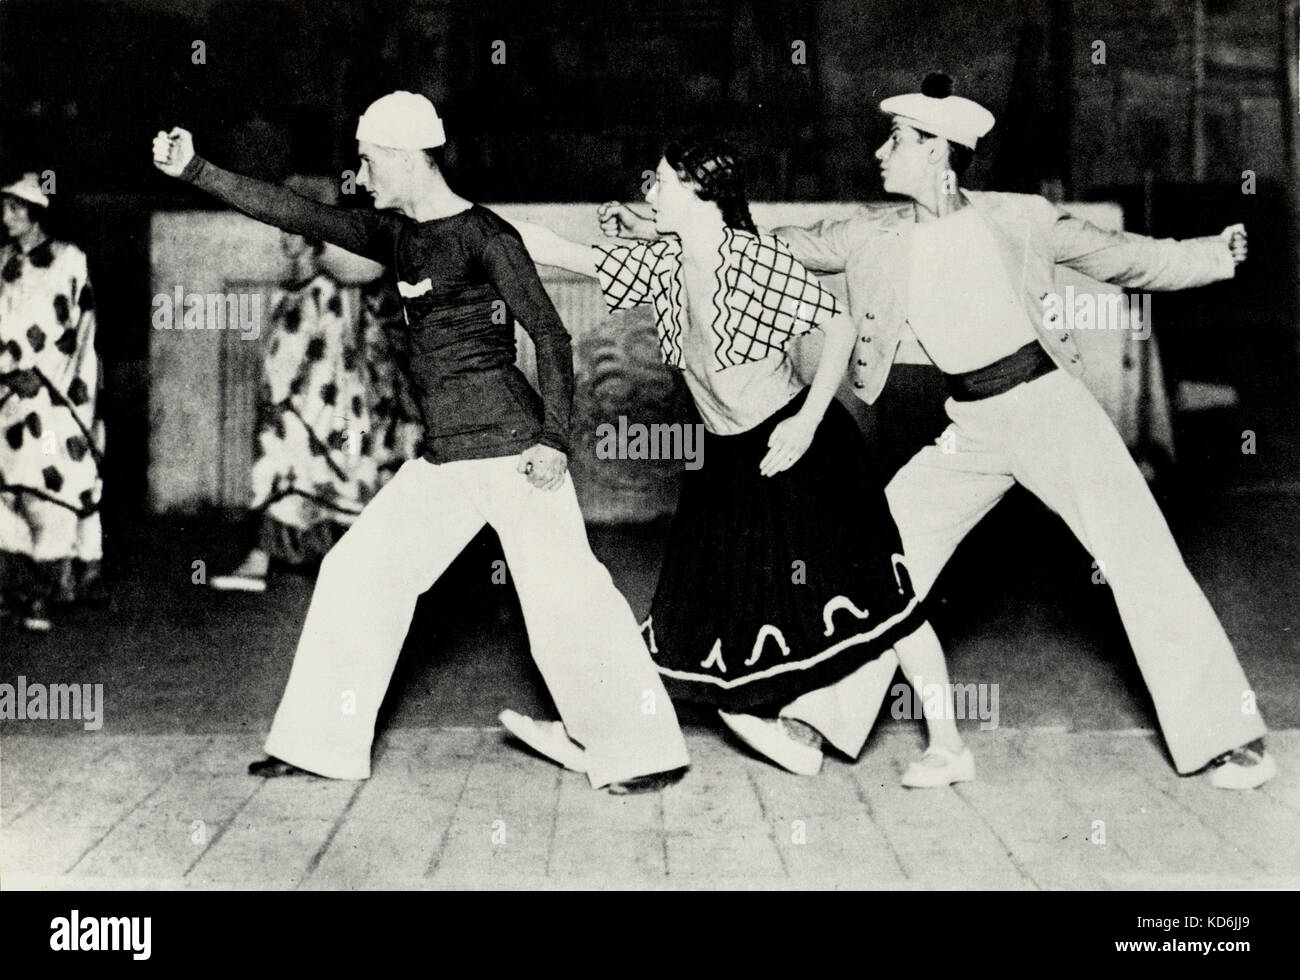 Georges Auric's ballet 'Les matelots' with Tadeo Slavinsky, Lydia Sokolova and Serge Lifar. From the original 1925 production, at the Coliseum, London. Ballets Russes de Diaghilev. Choreography by Massine. . Ballet Russe, Ballets Russes Stock Photo